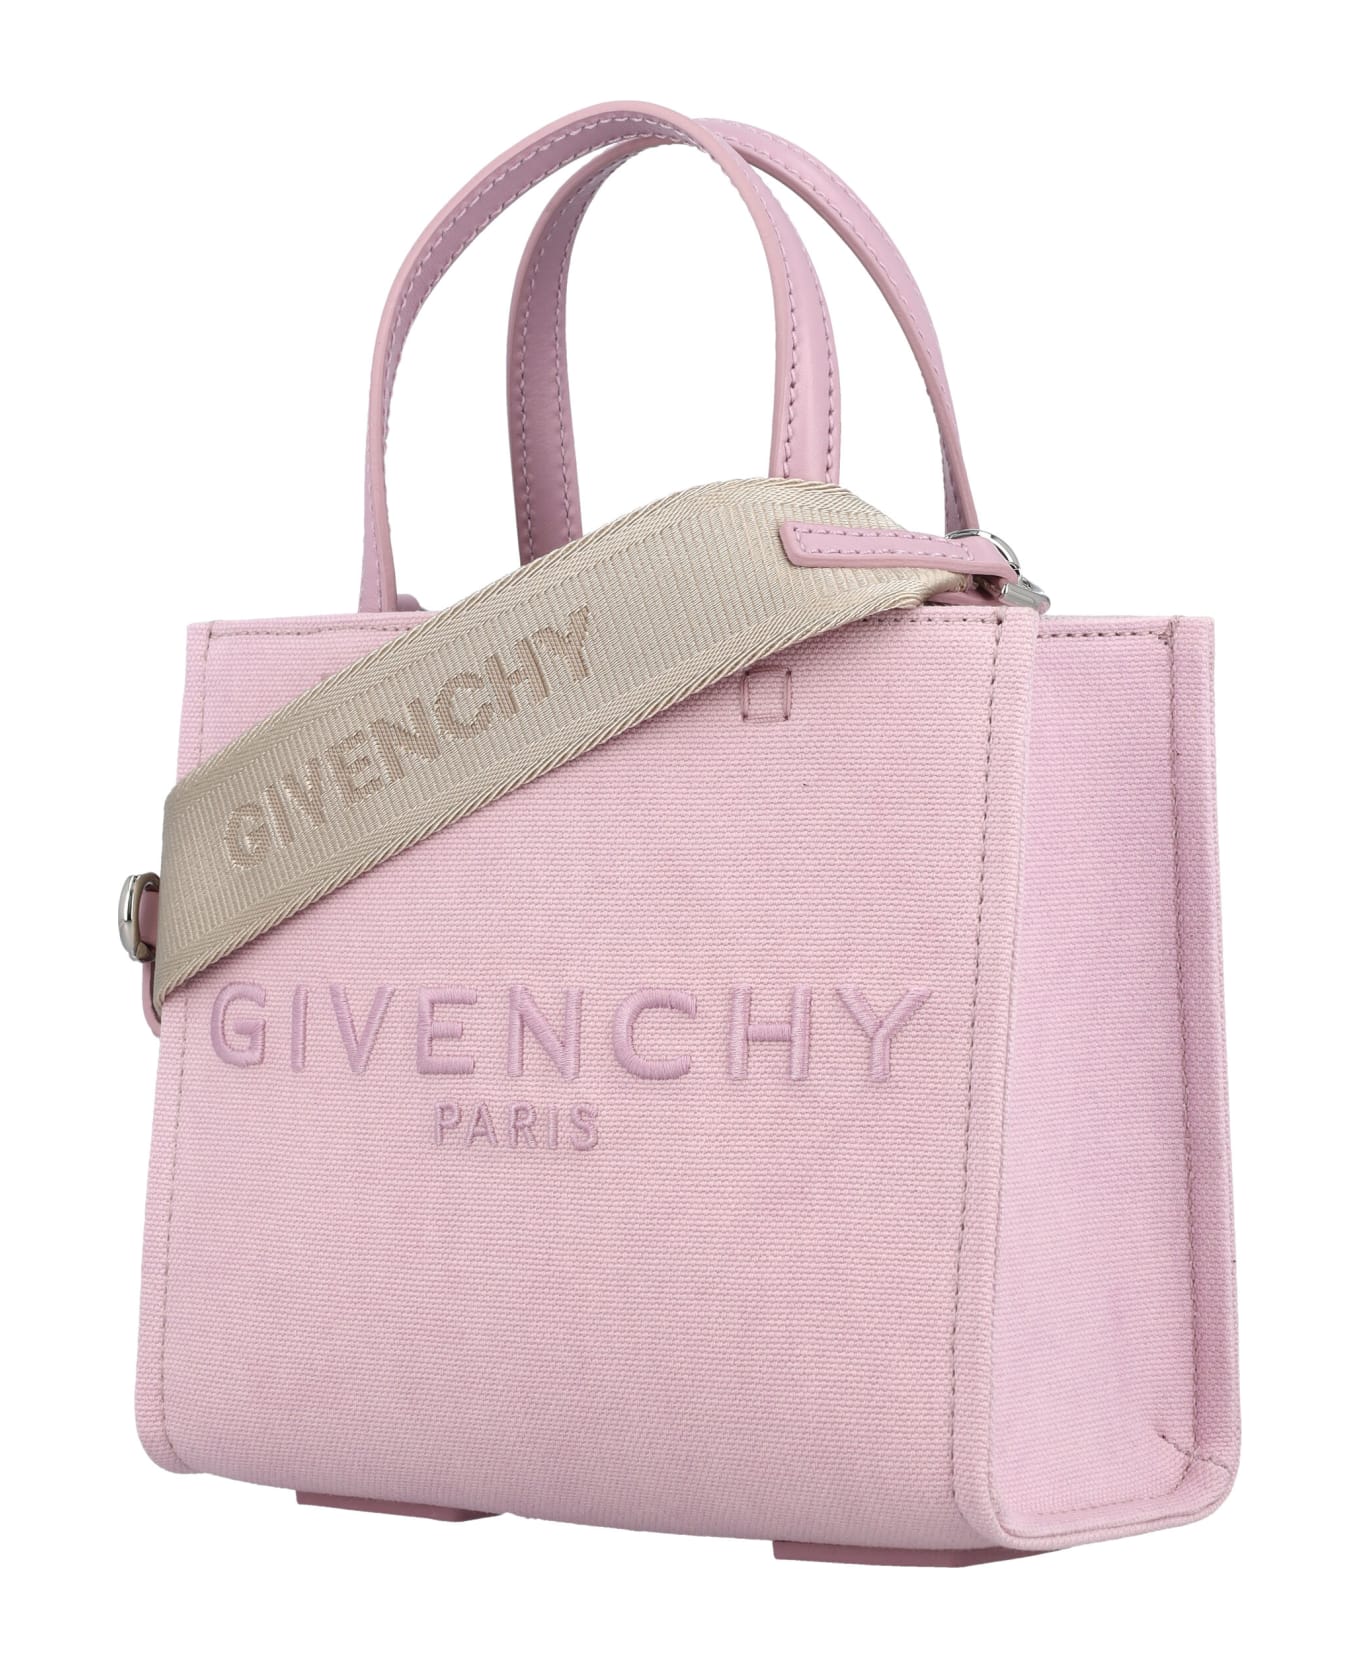 Givenchy G-tote Mini Tote Bag - OLD PINK トートバッグ